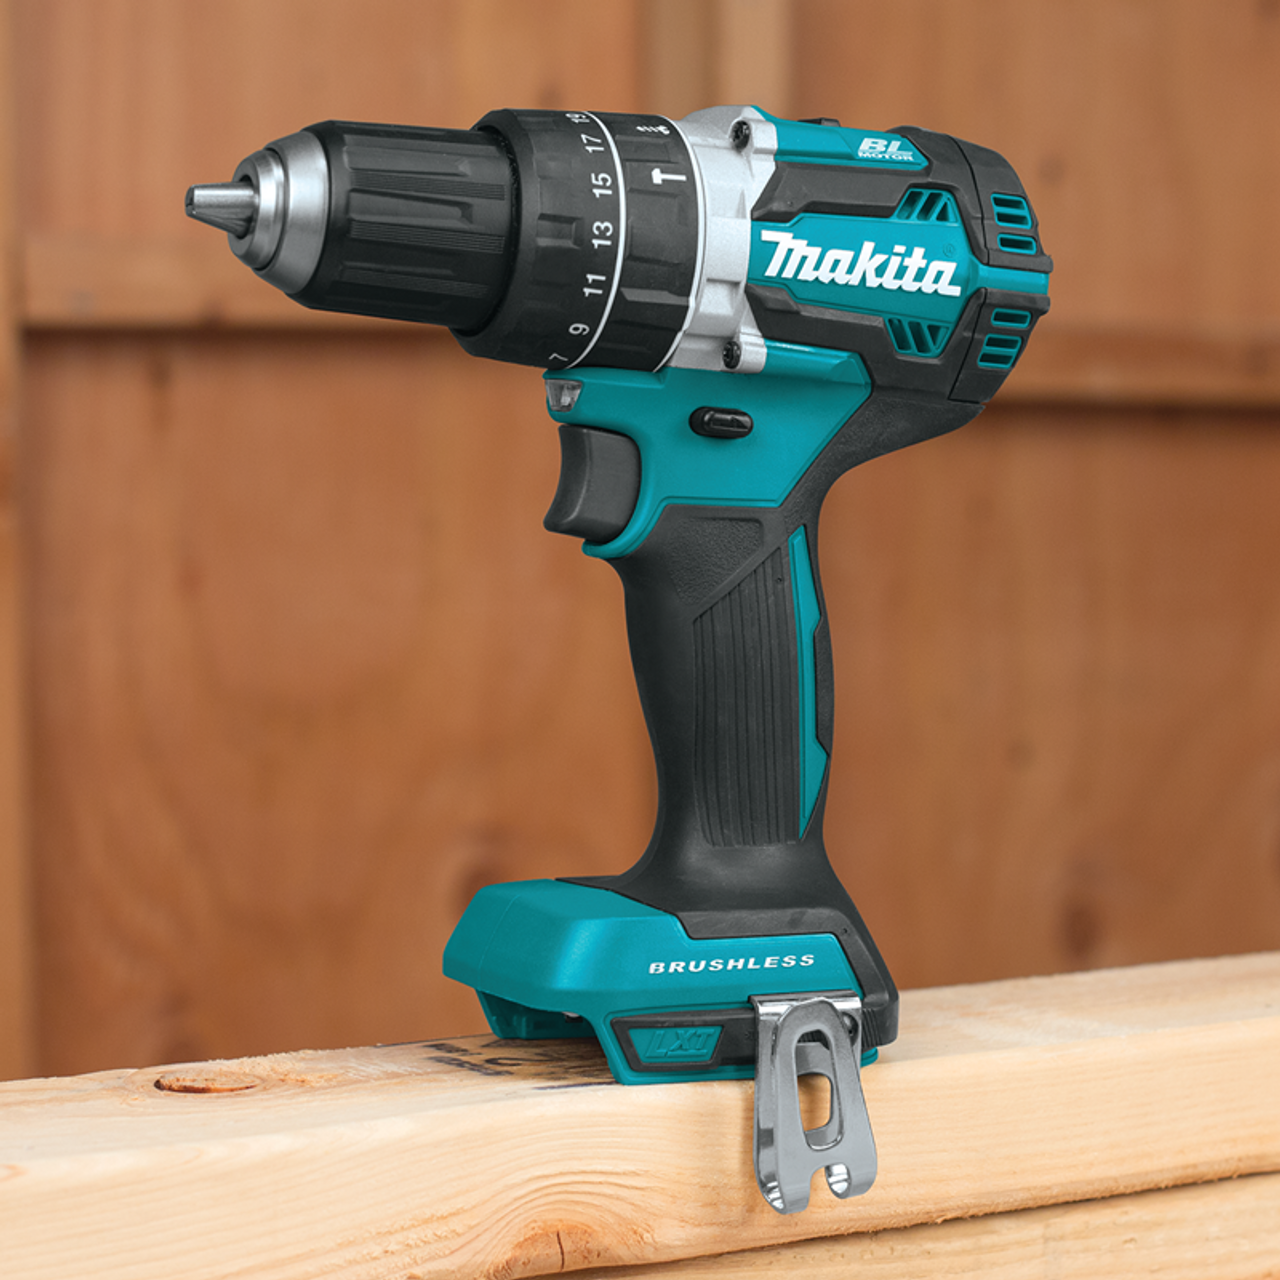 18V LXT? Lithium-Ion Compact Brushless Cordless 1/2" Hammer Driver-Drill, Tool Only, Compact design, XPH12Z